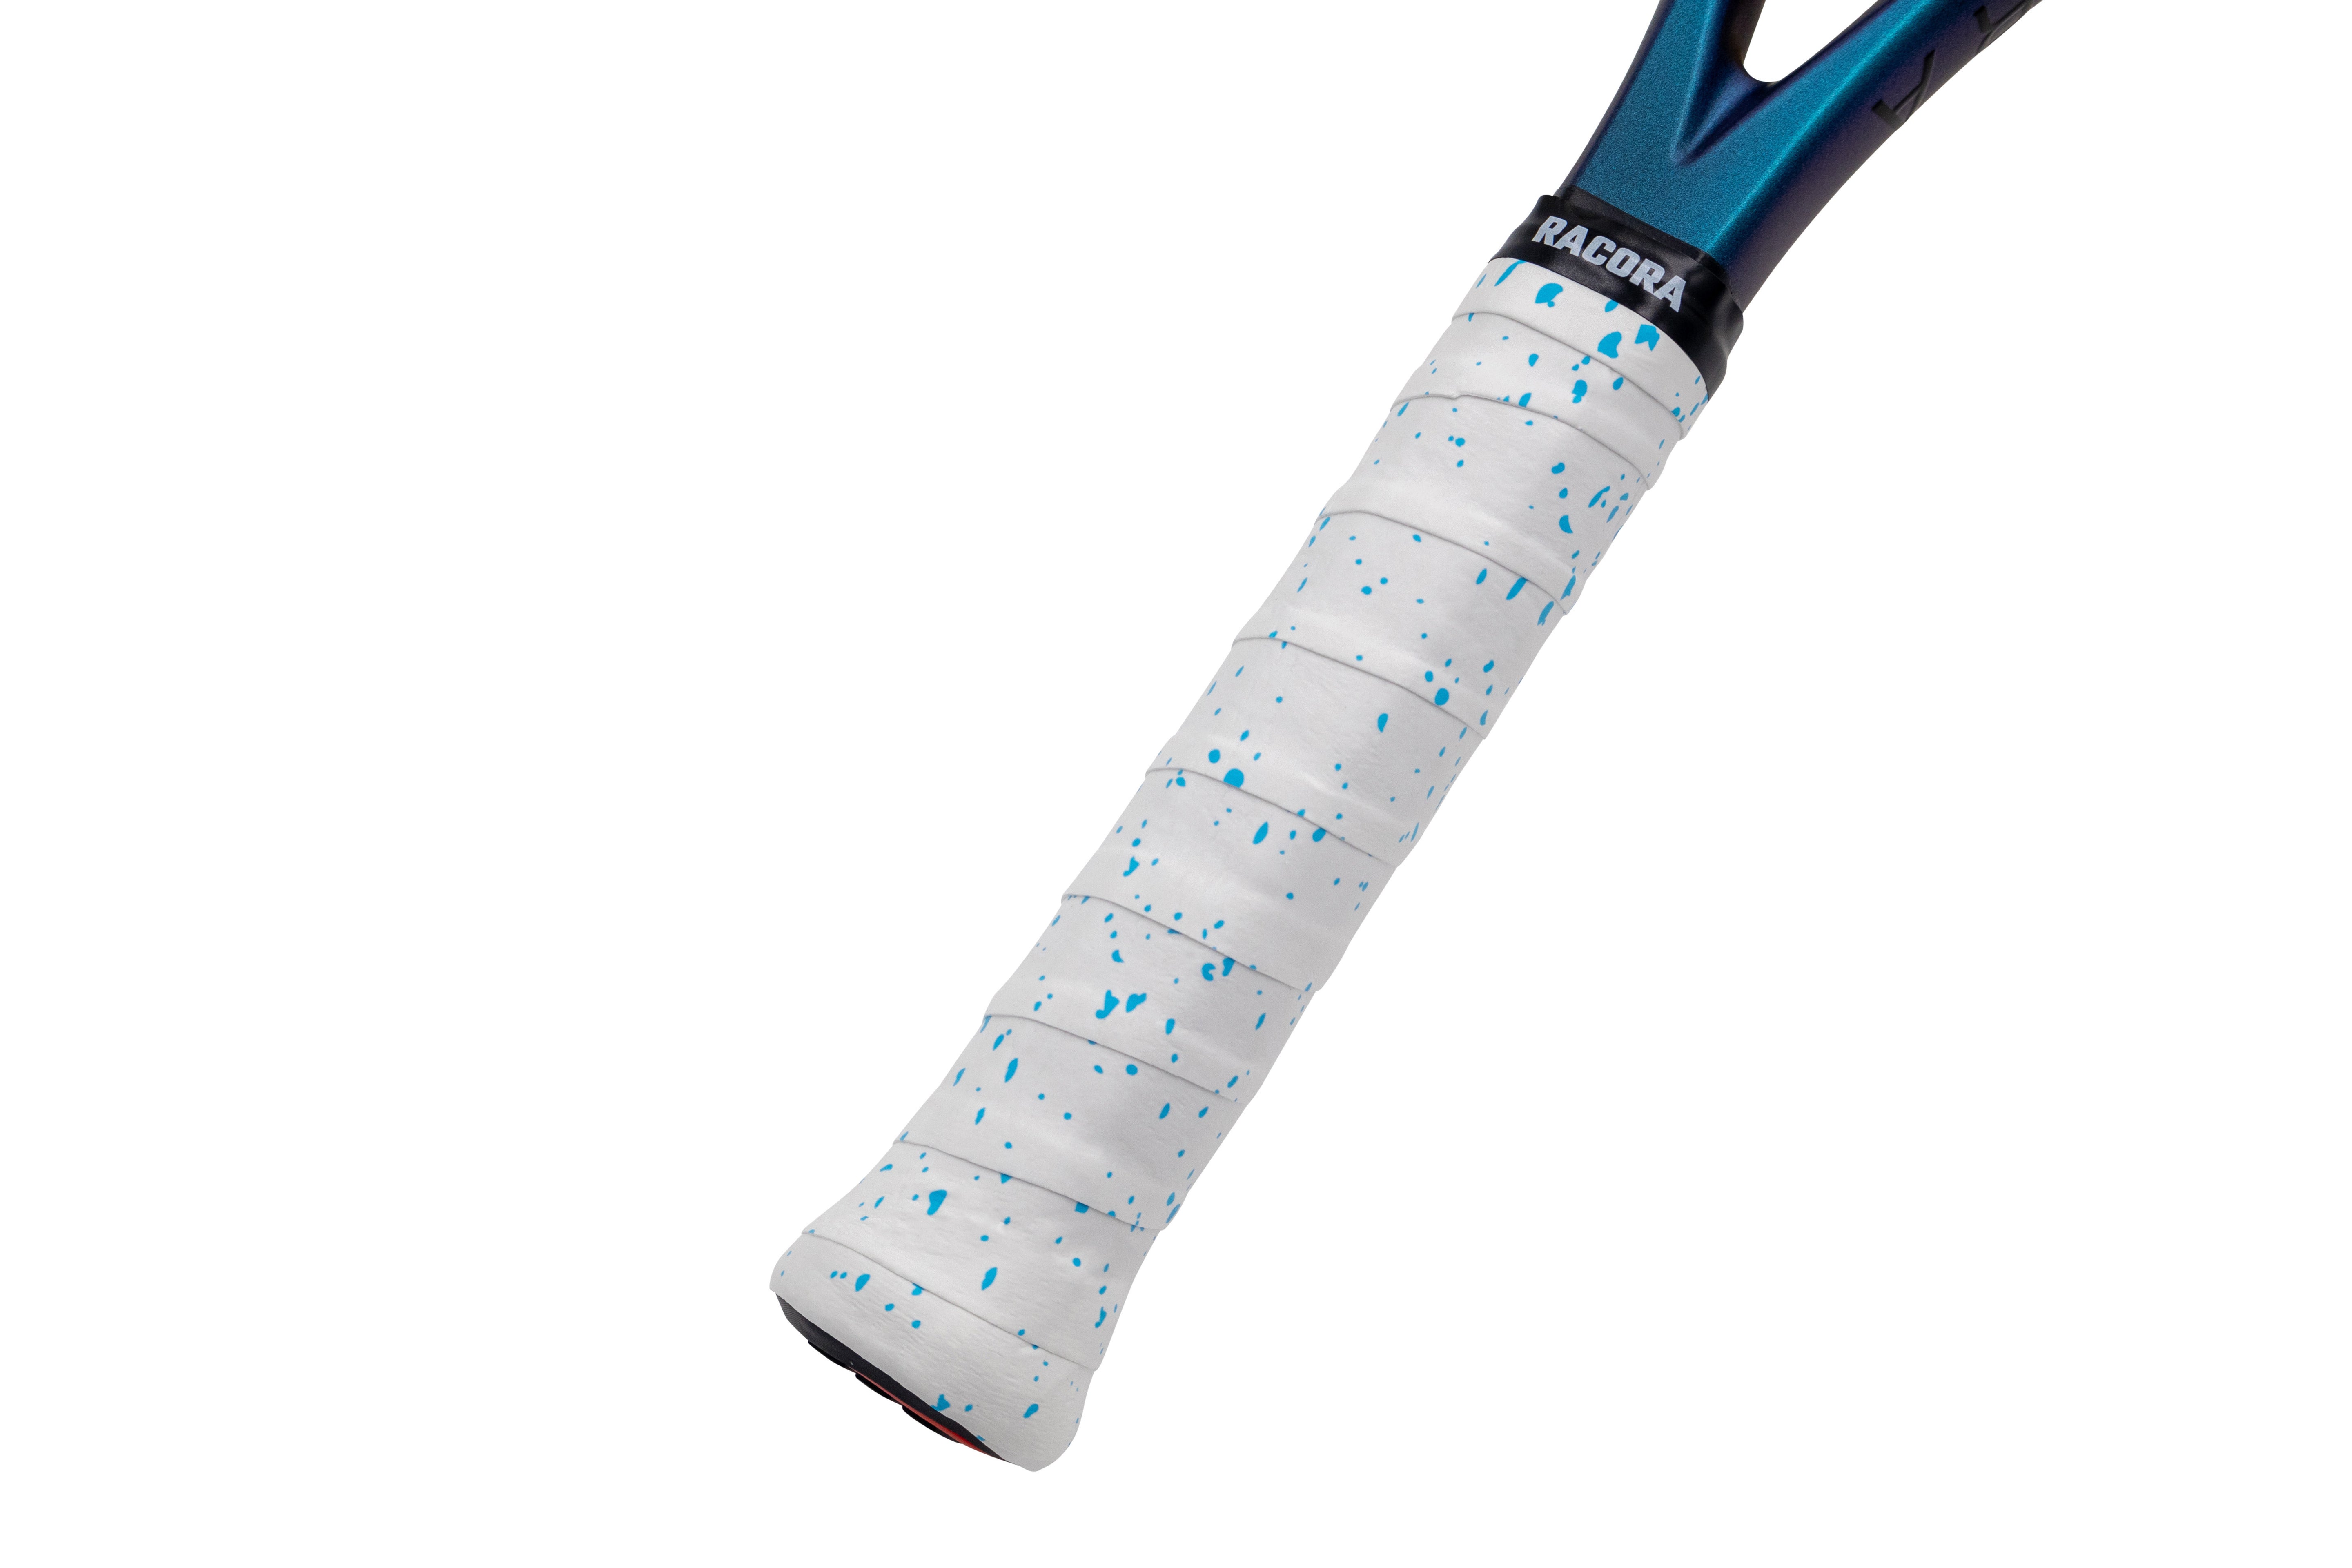 Racora white &amp; blue speckle tennis overgrip on tennis racket, held at an angle